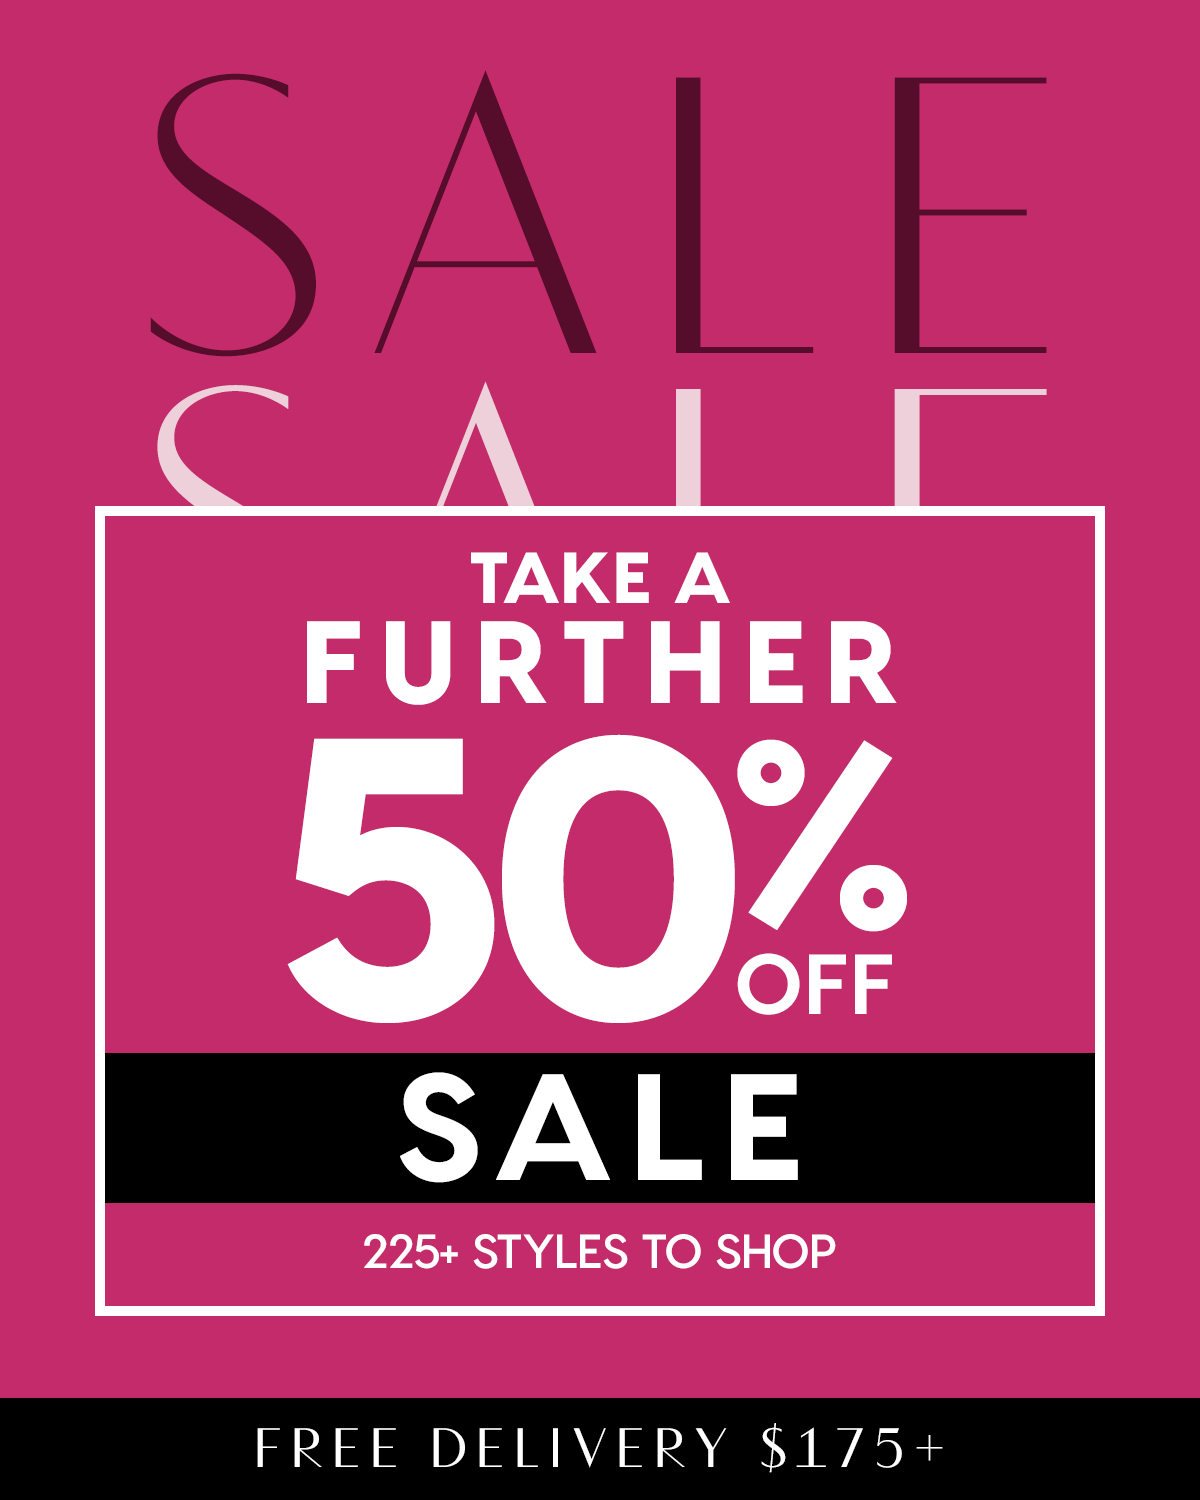 Take A Further 50% Off Sale. 250+ Styles To Shop. Free Delivery 175+